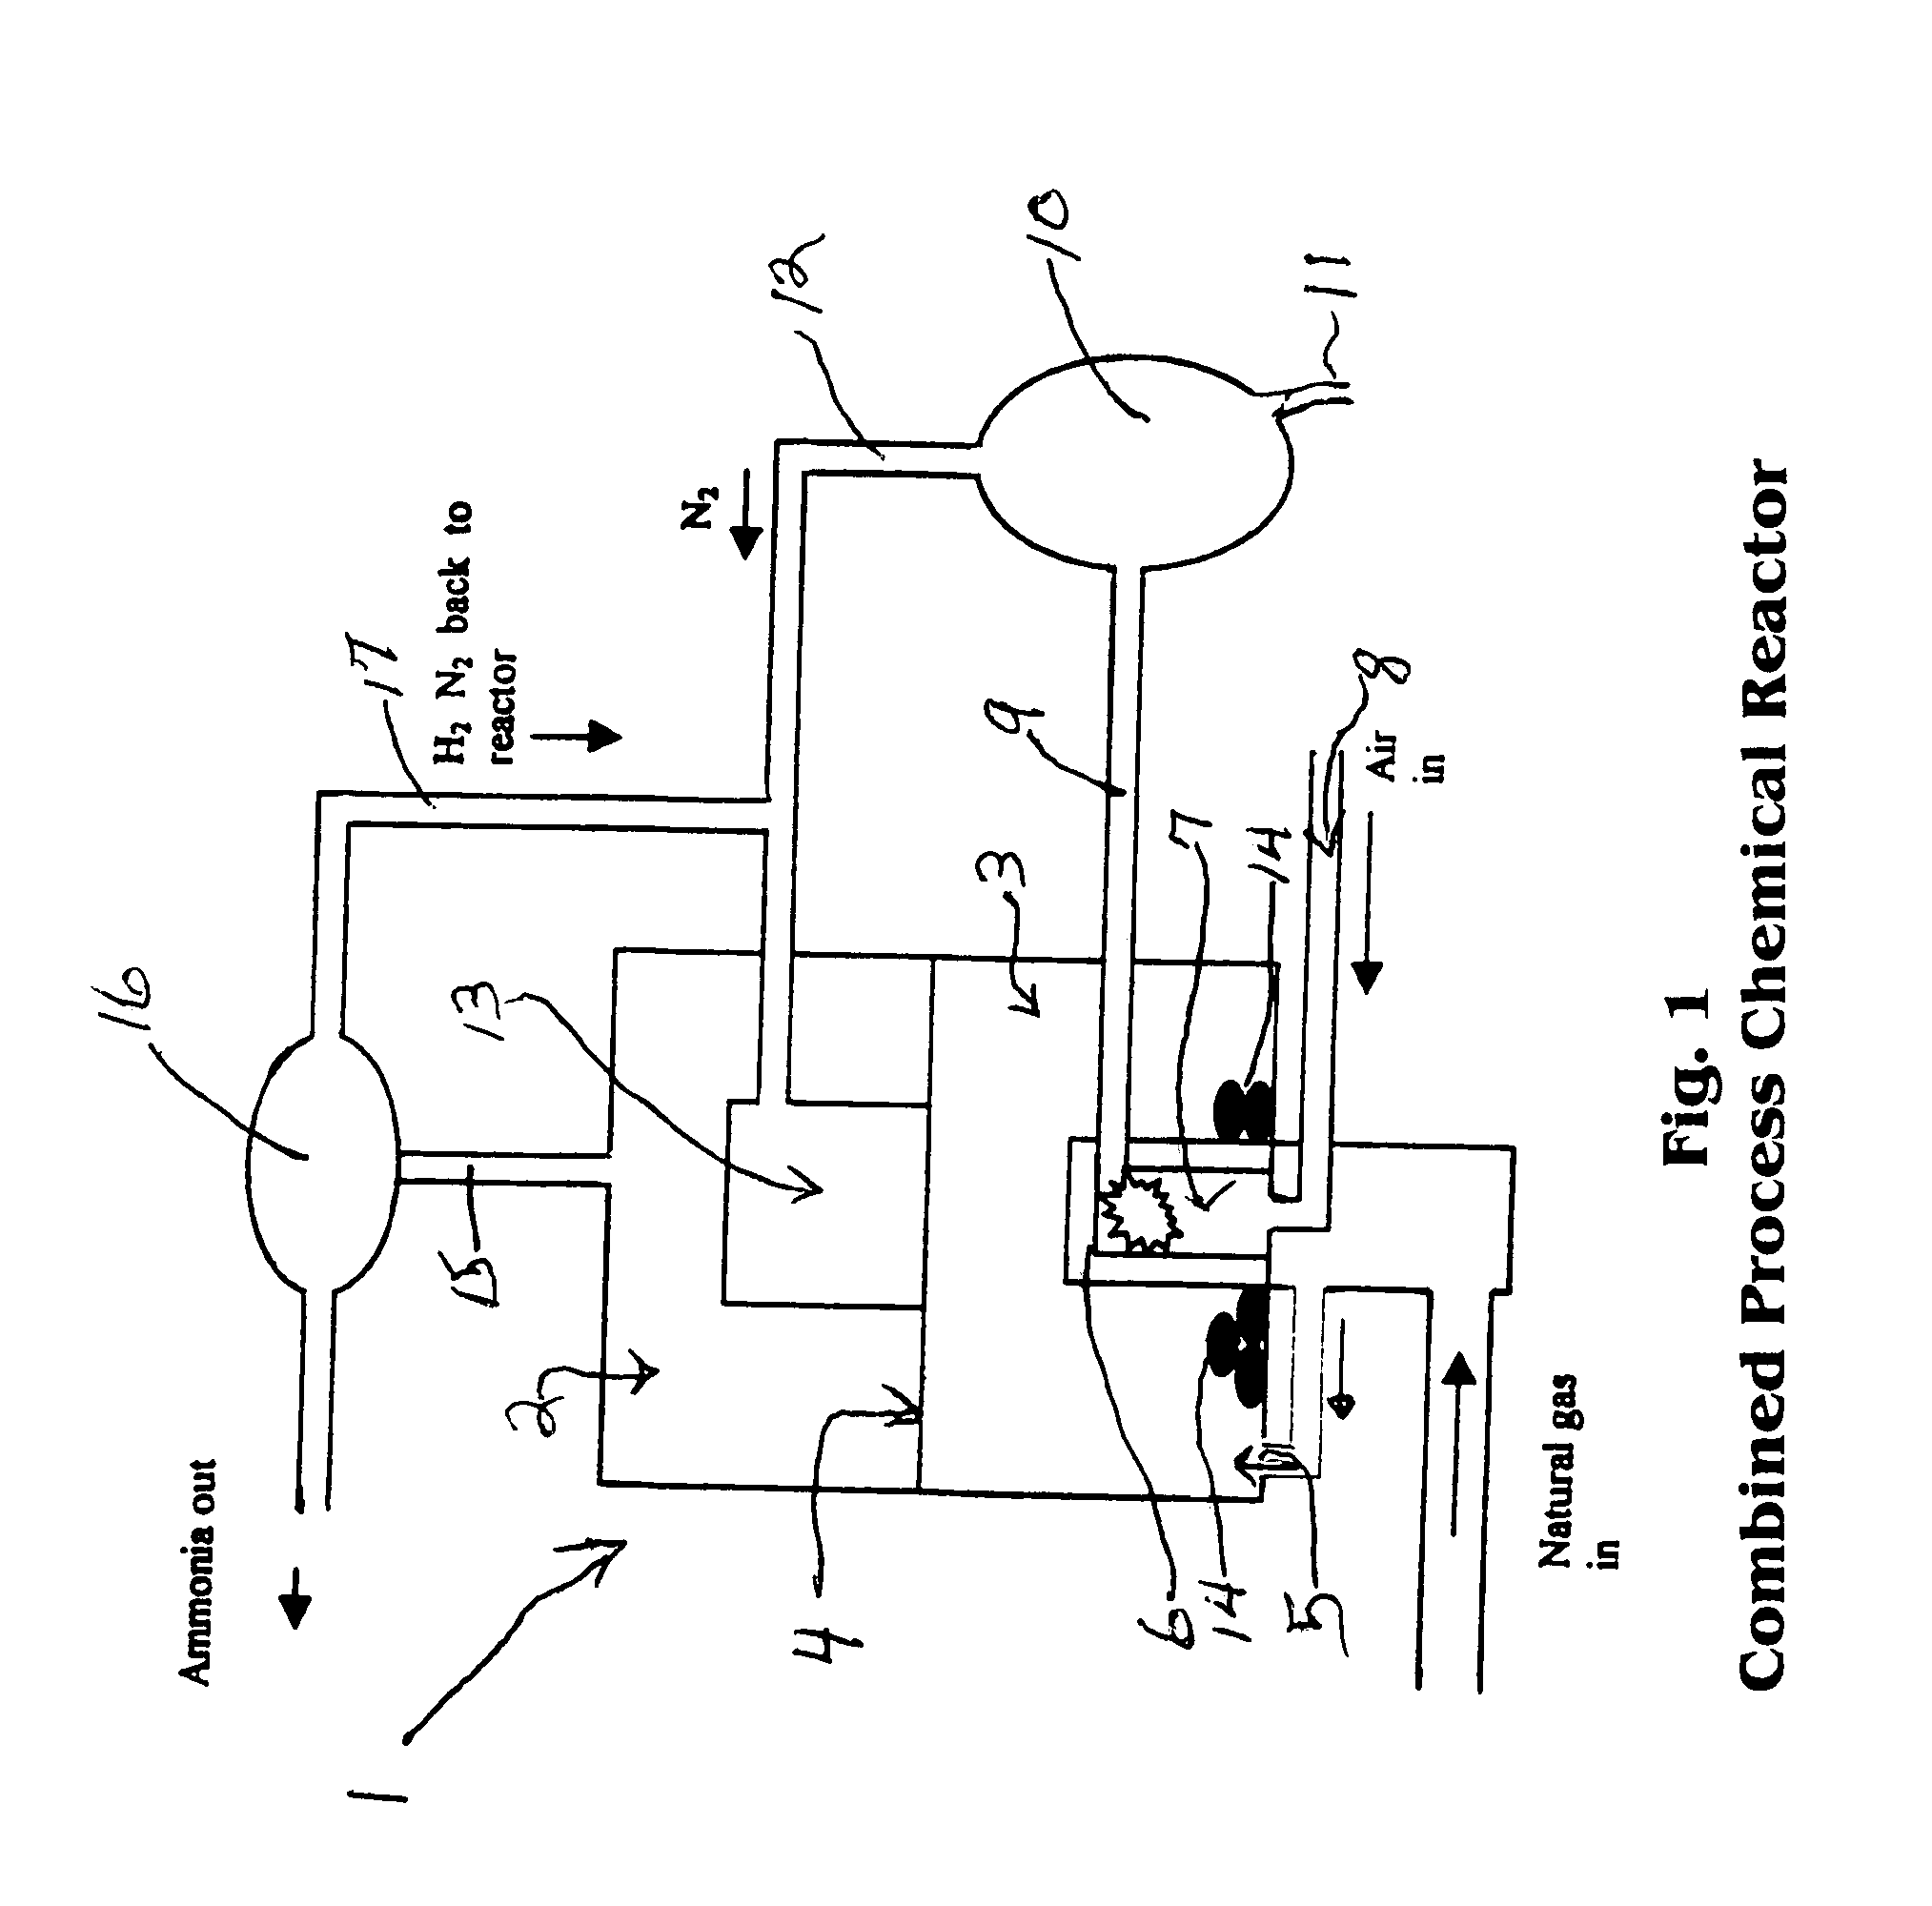 Combined methane decomposition and ammonia formation cell